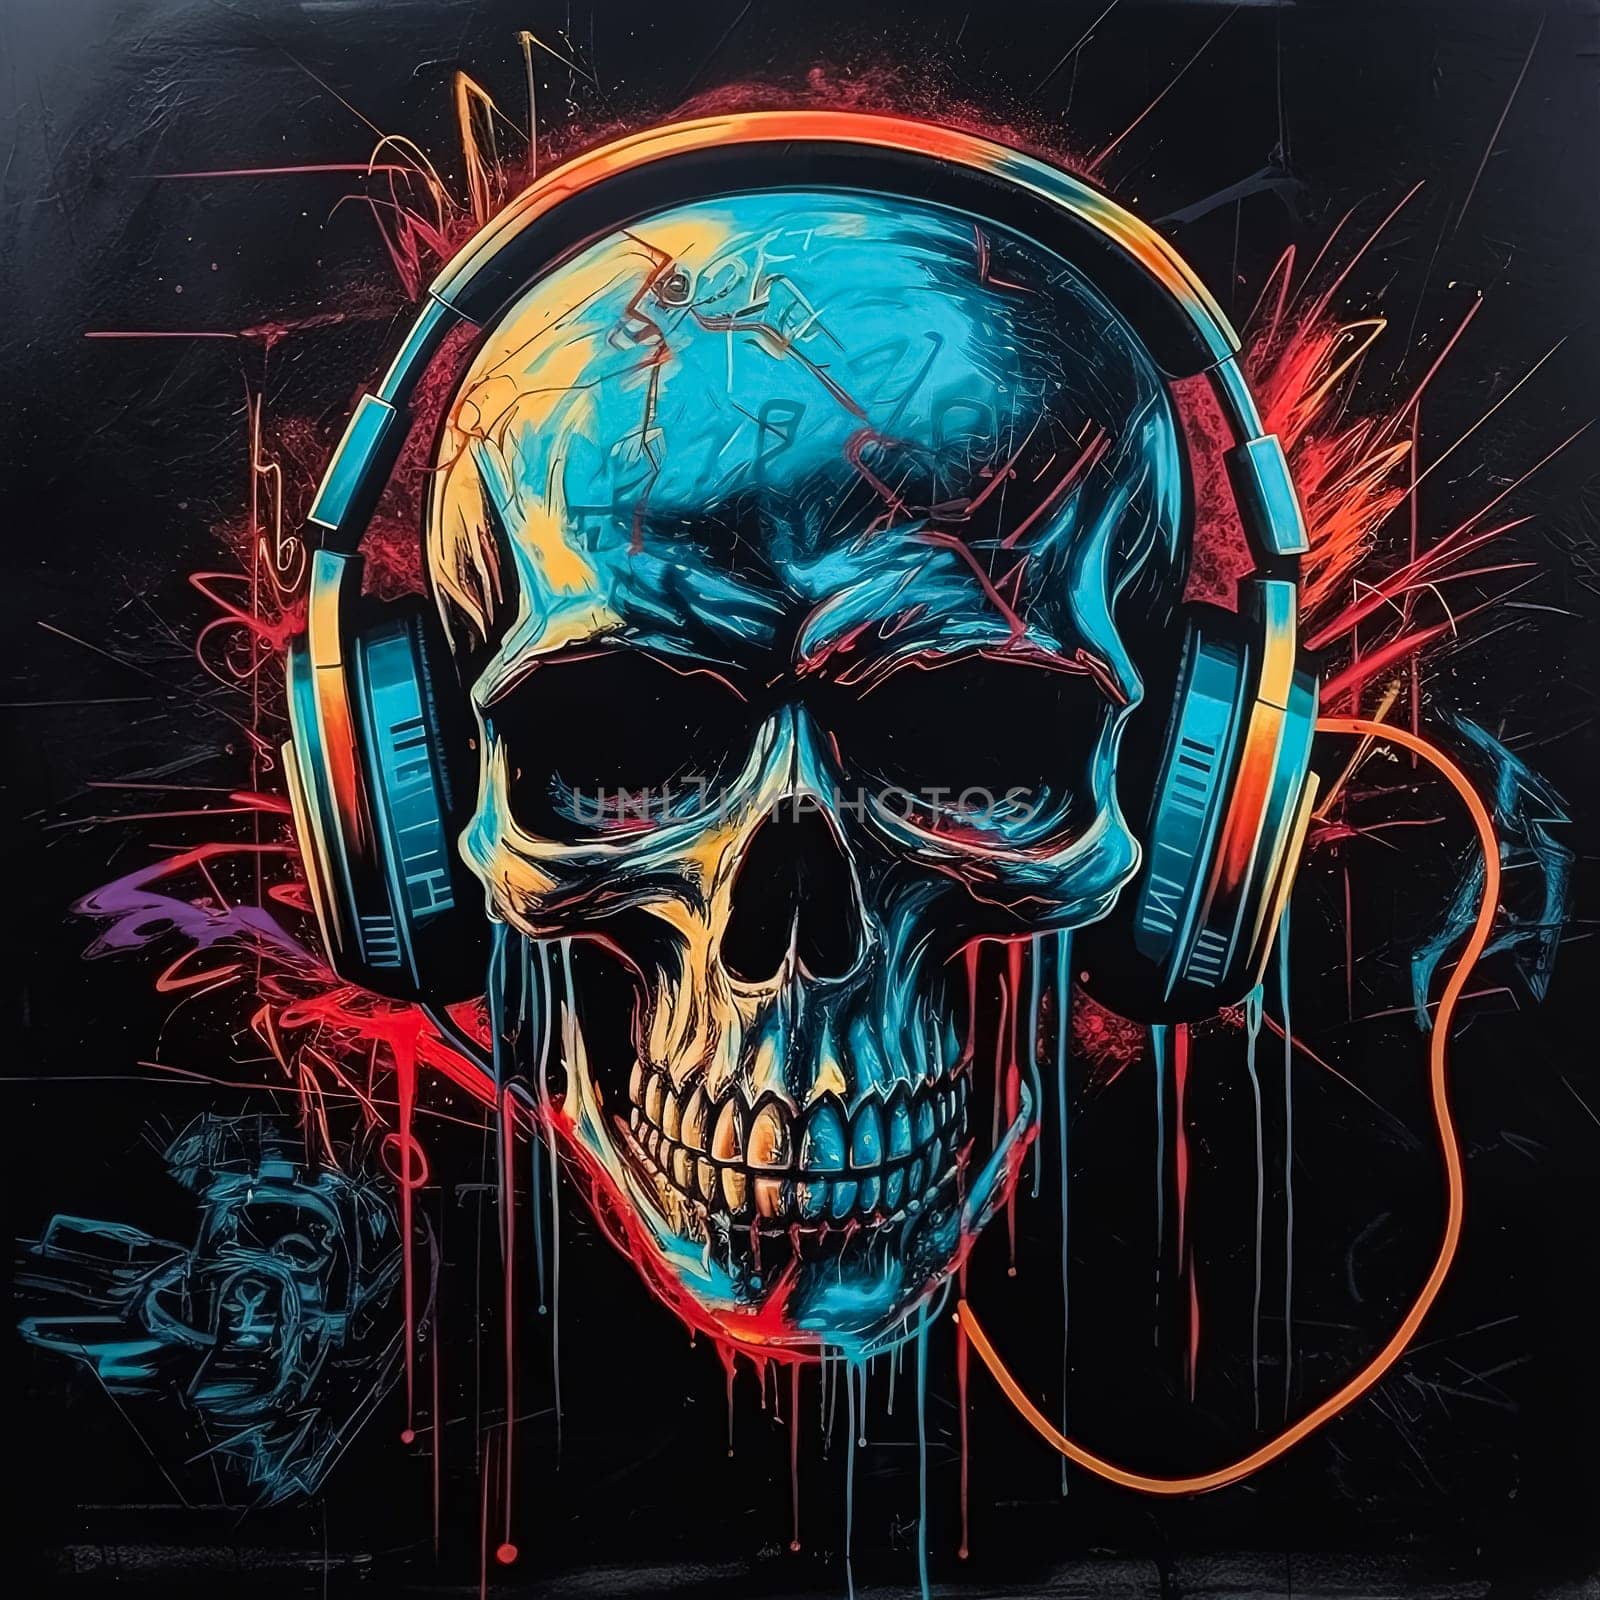 A neon skull with neon colors. The skull is surrounded by a colorful background. The colors are bright and vibrant, giving the image a fun and energetic vibe